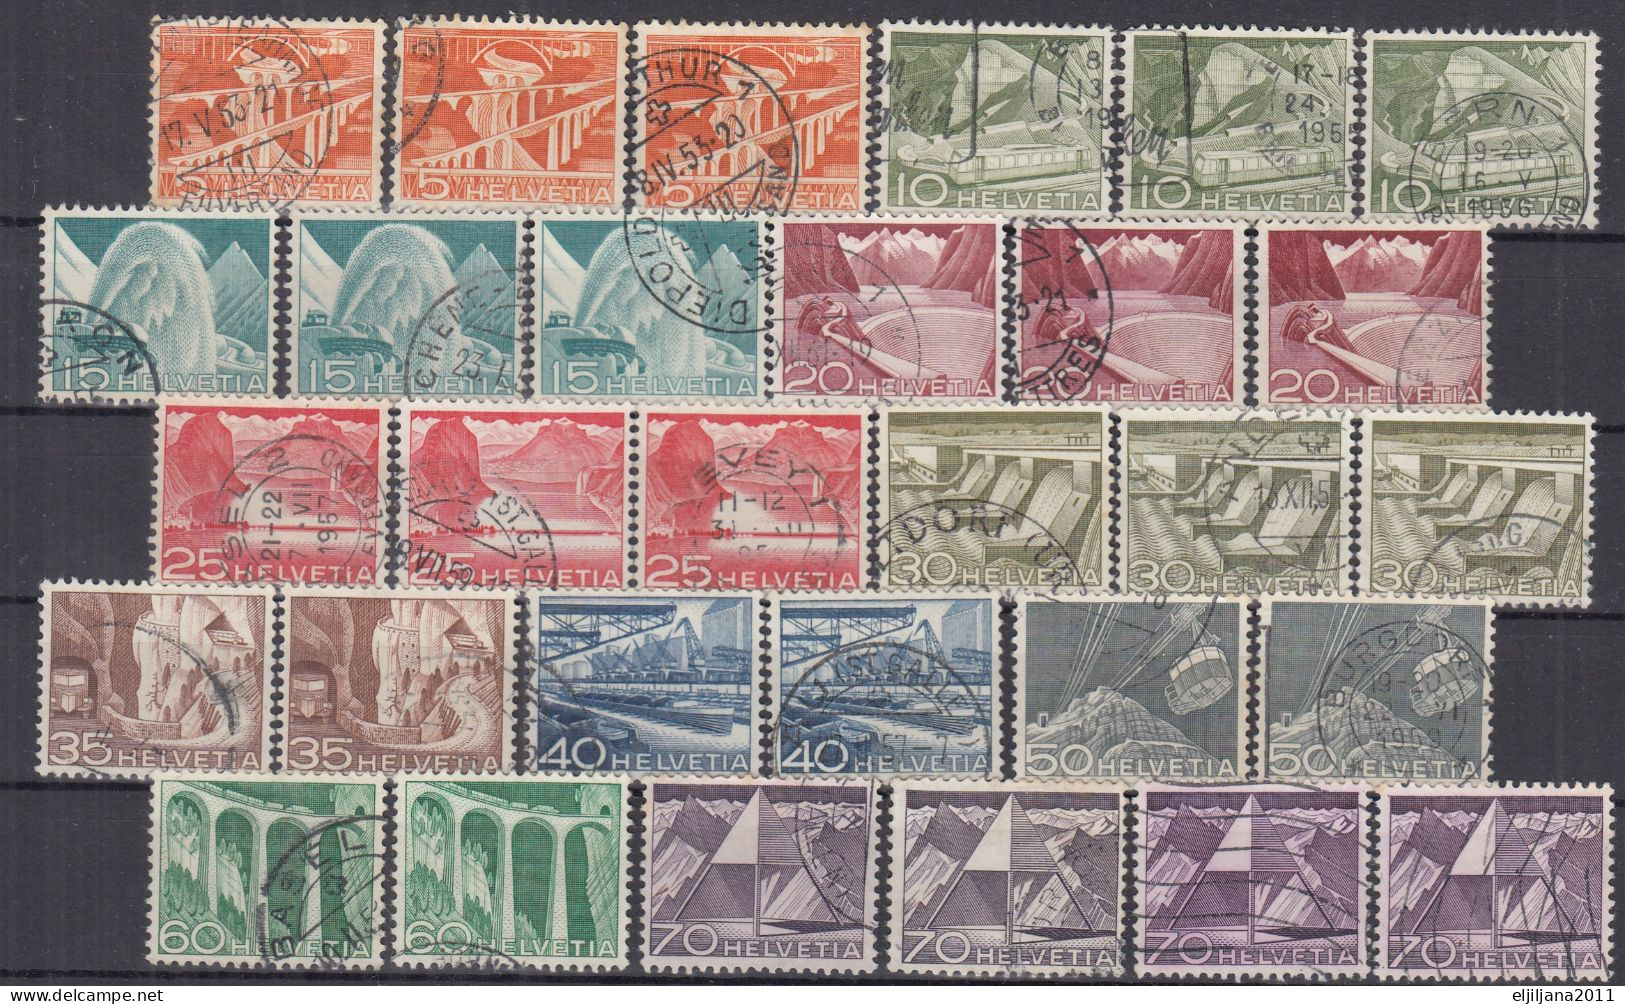 Switzerland / Helvetia / Schweiz / Suisse 1949 ⁕ Landscapes And Technical Mi.530-540 ⁕ 30v Used - Used Stamps